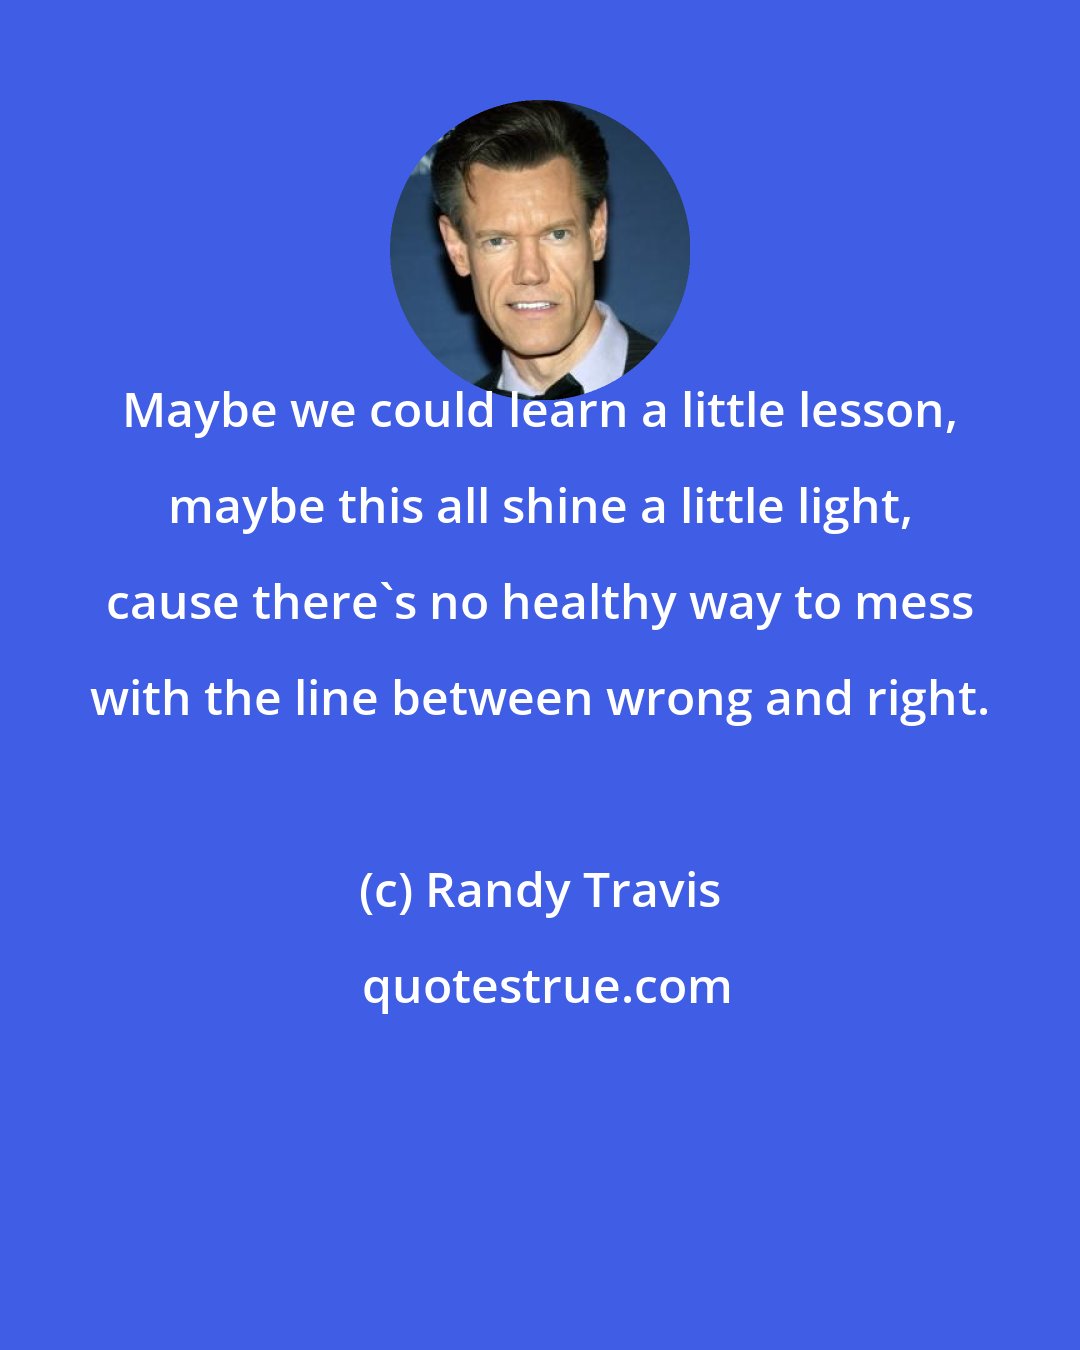 Randy Travis: Maybe we could learn a little lesson, maybe this all shine a little light, cause there's no healthy way to mess with the line between wrong and right.